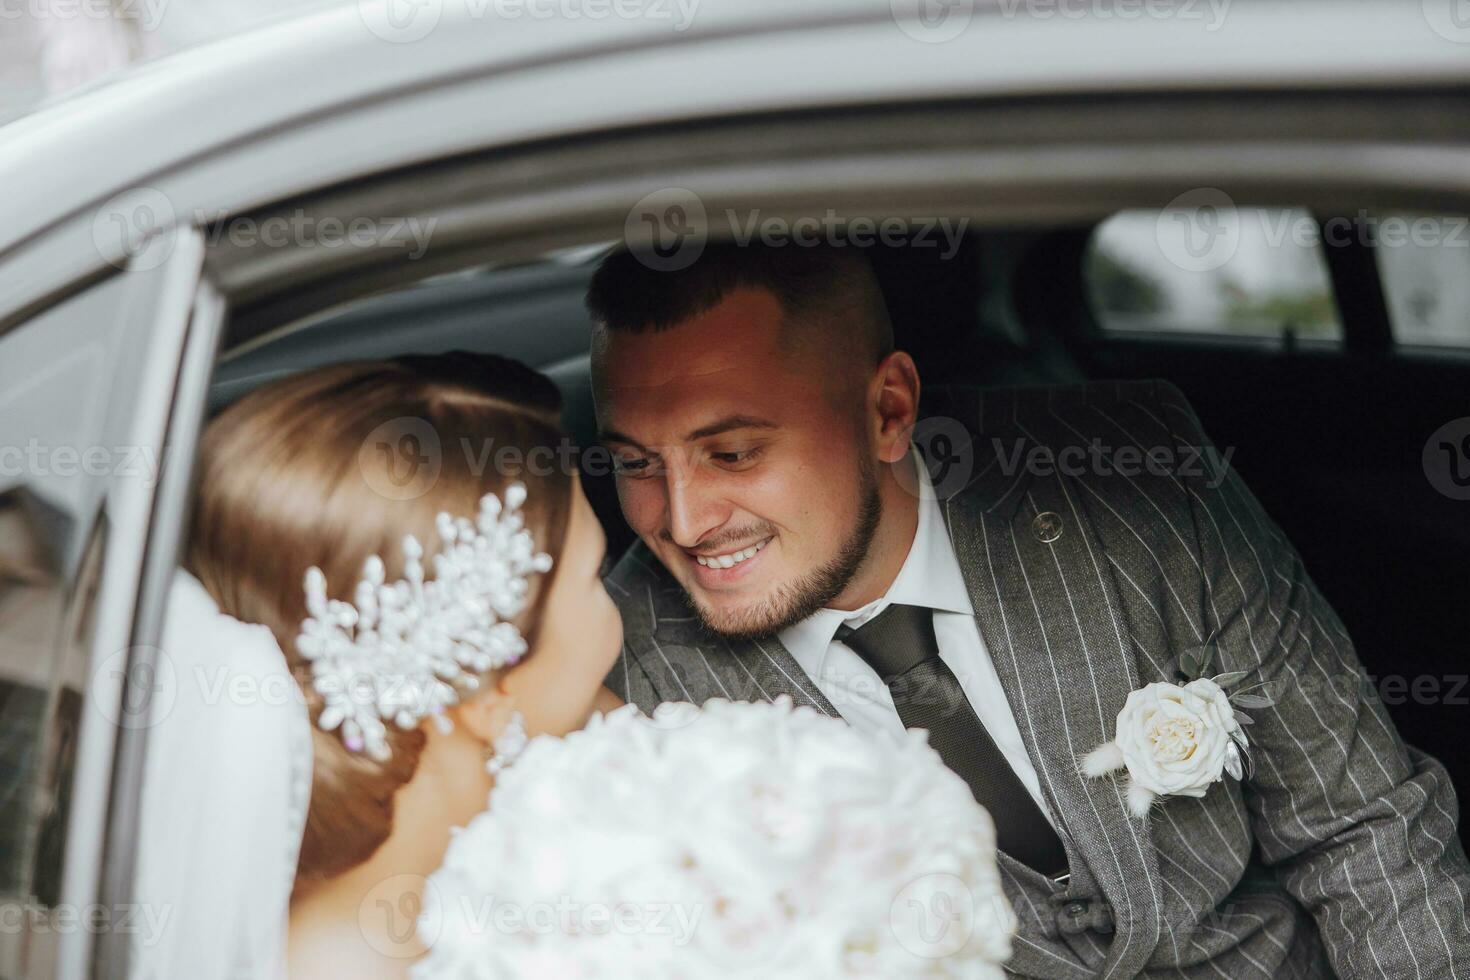 A modern bride and groom in a lace dress in a car window. Beautiful and smiling newlyweds. Happy holiday. photo